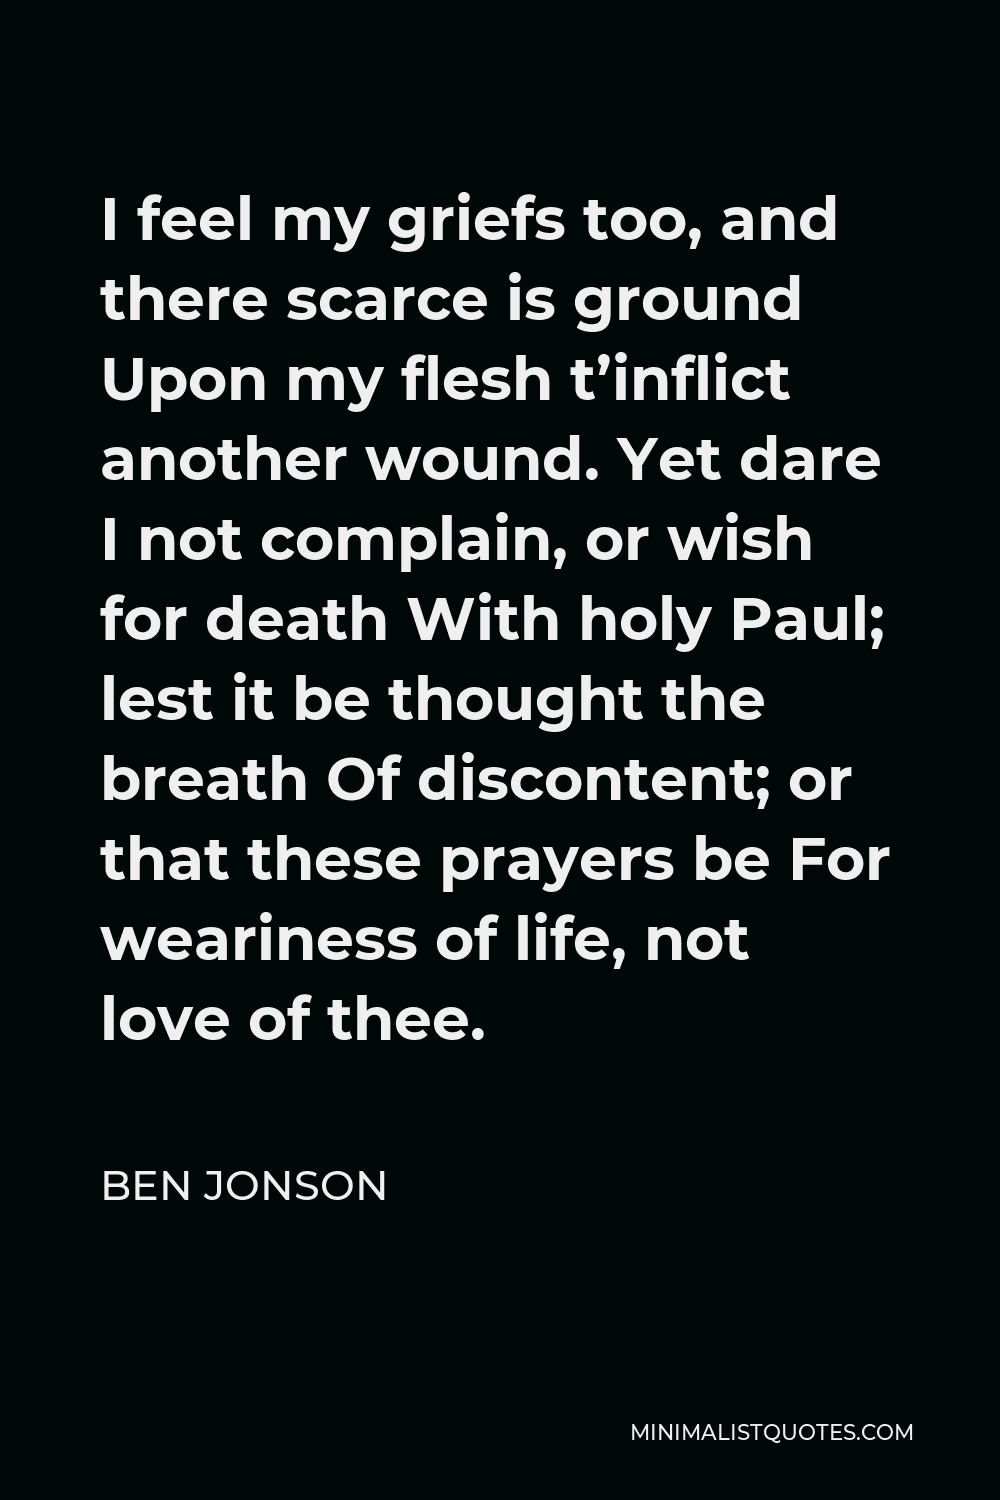 Ben Jonson Quote - I feel my griefs too, and there scarce is ground Upon my flesh t’inflict another wound. Yet dare I not complain, or wish for death With holy Paul; lest it be thought the breath Of discontent; or that these prayers be For weariness of life, not love of thee.